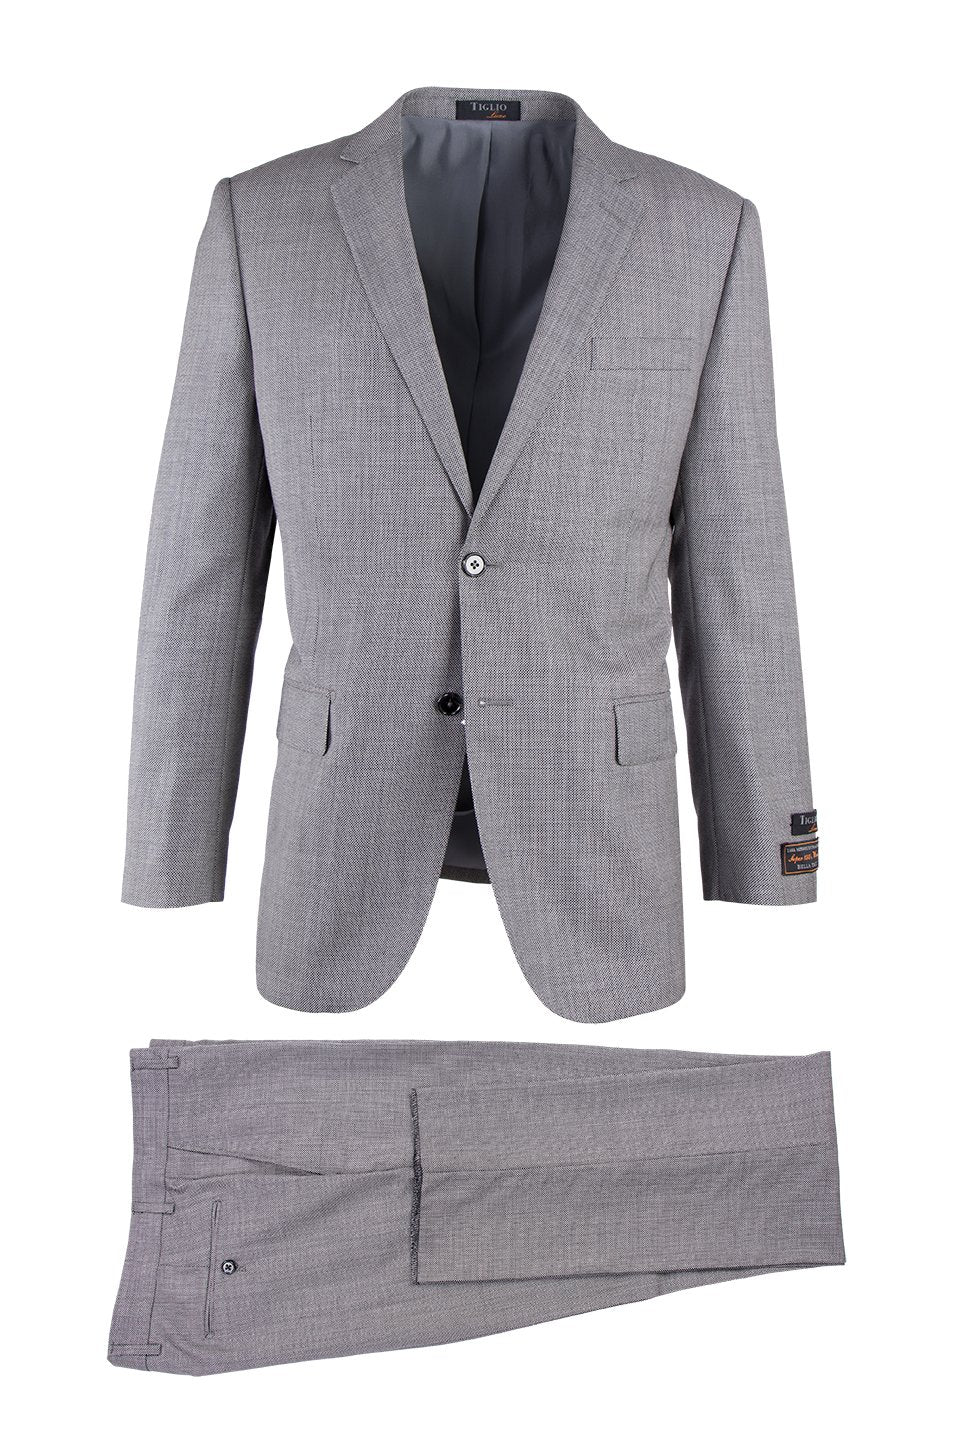 Novello Light Gray Birdseye, Modern Fit, Pure Wool Suit by Tiglio Luxe